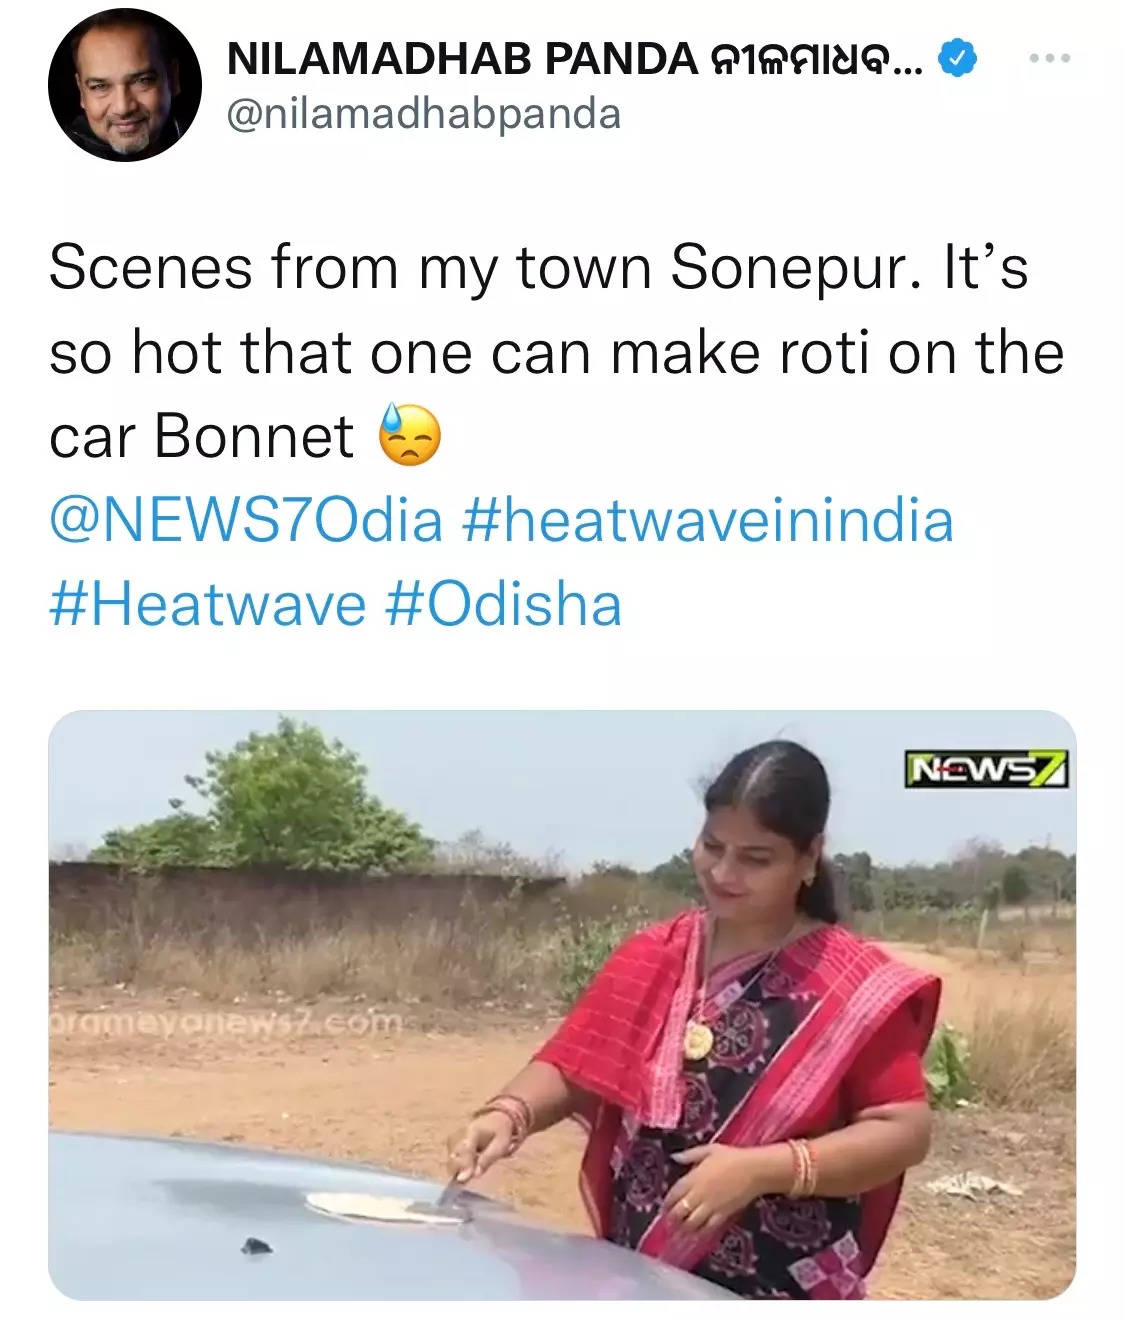 Filmmaker Nilamadhab Panda recently shared a tweet, showing a woman cooking roti on the bonnet of a car in Odisha due to extreme heat